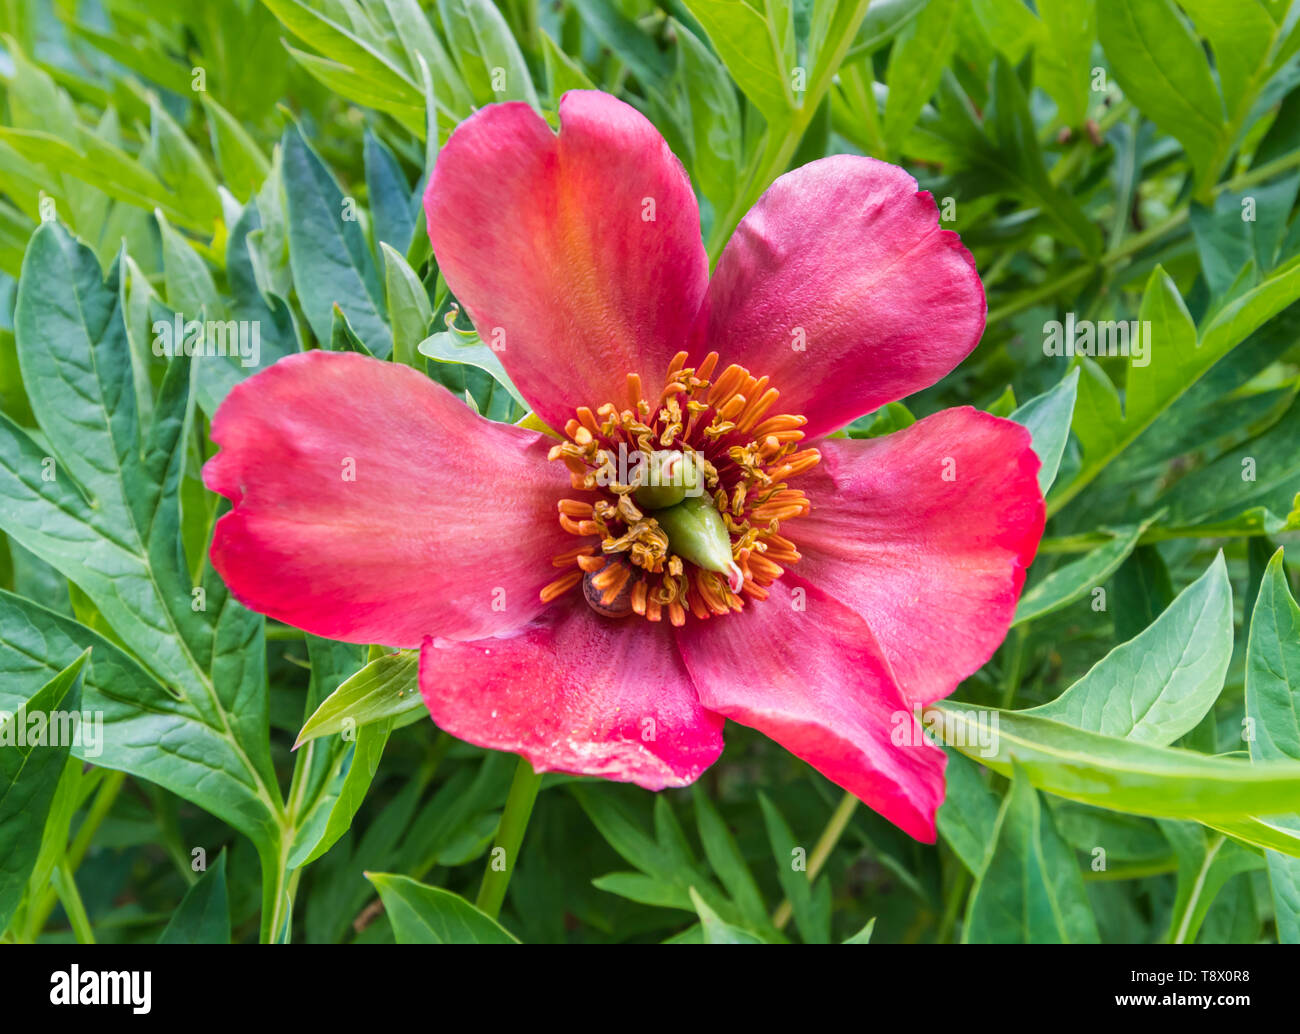 Red Tree Peony, a large flower from the genus Paeonia, growing in Spring (May) in West Sussex, England, UK. Stock Photo